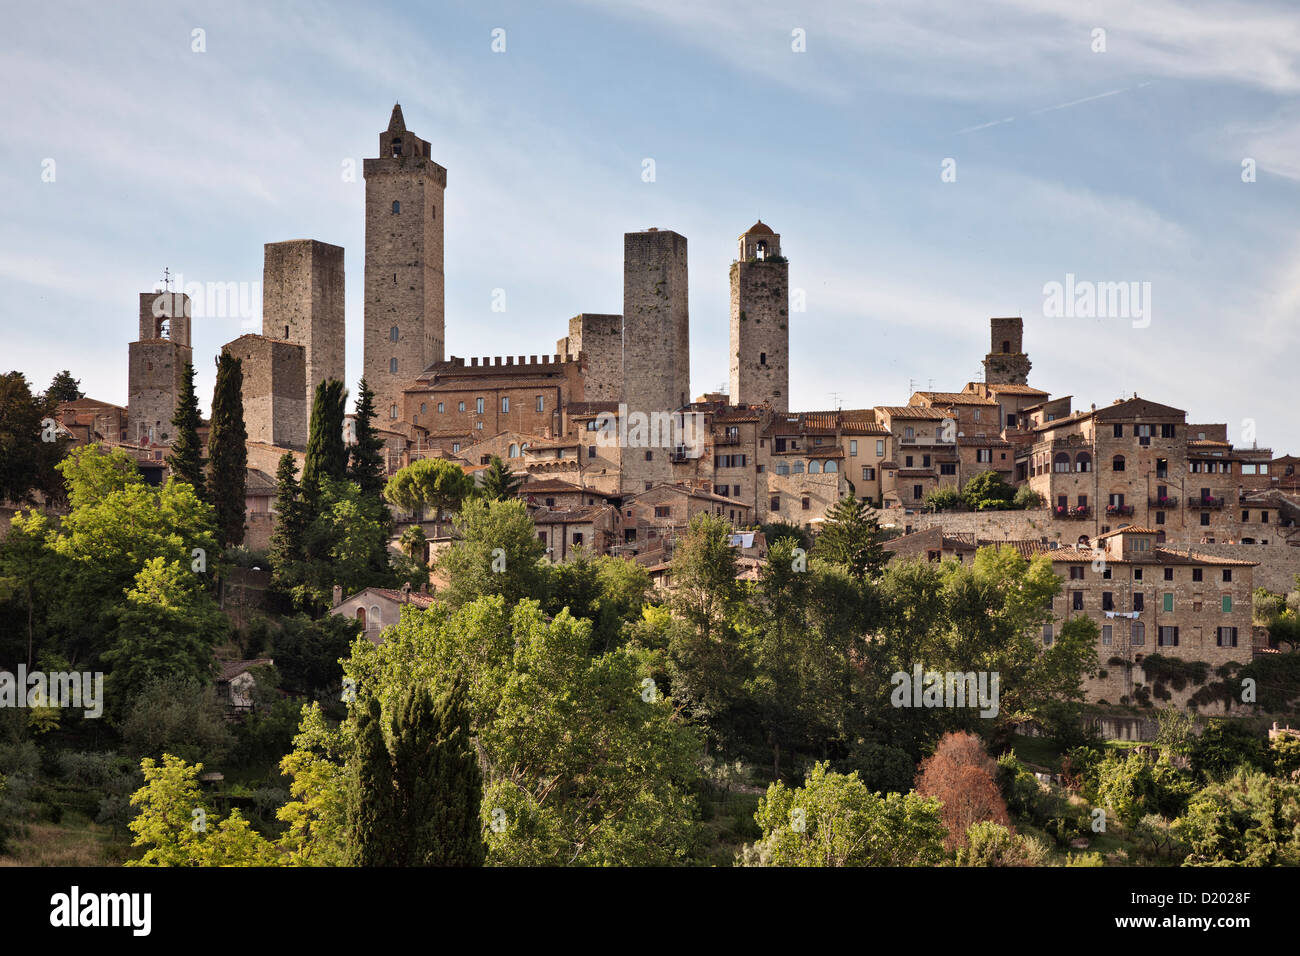 Small walled medieval hill town, San Gimignano, Province of Siena, Tuscany, Italy Stock Photo